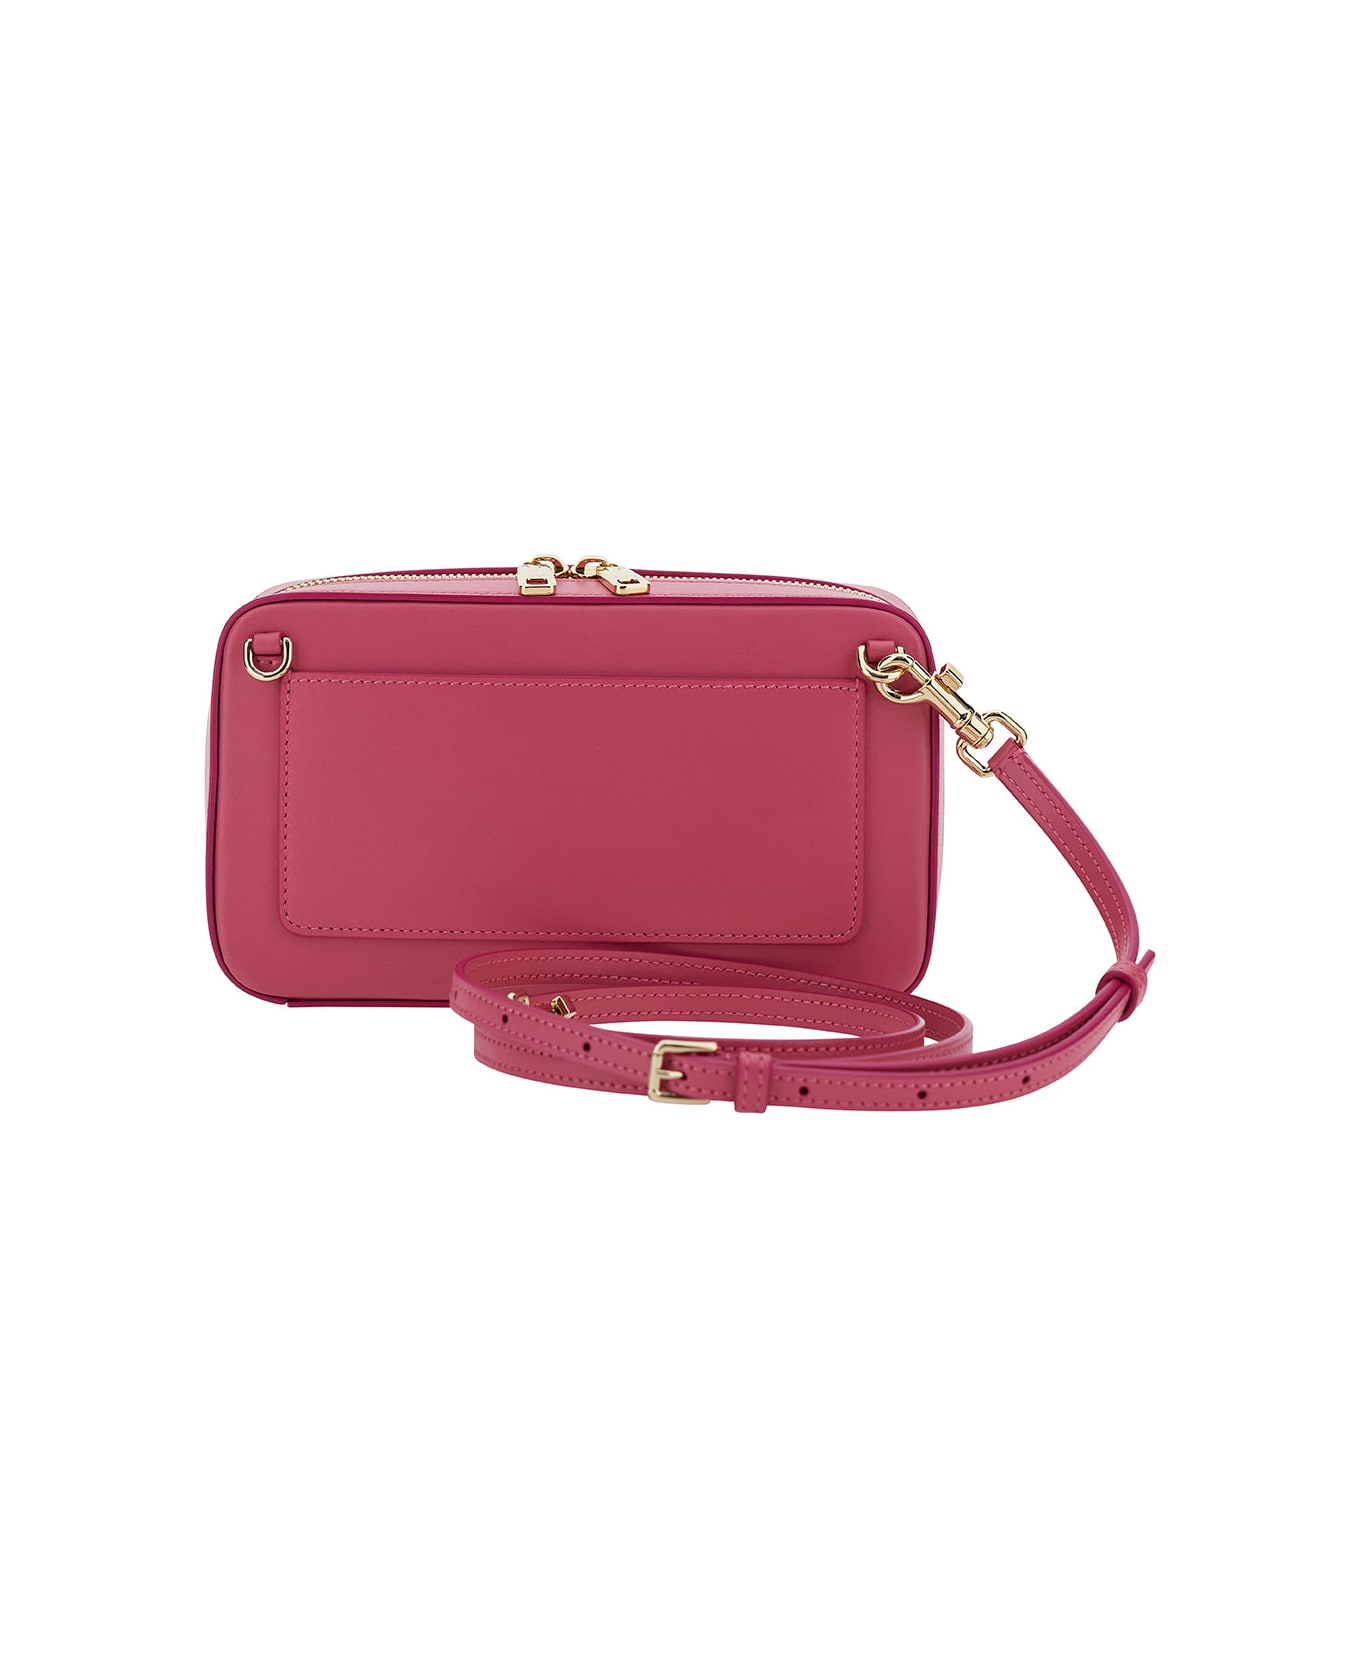 Dolce & Gabbana Pink Shoulder Bag With Quilted Dg Logo In Leather Woman - Pink クラッチバッグ